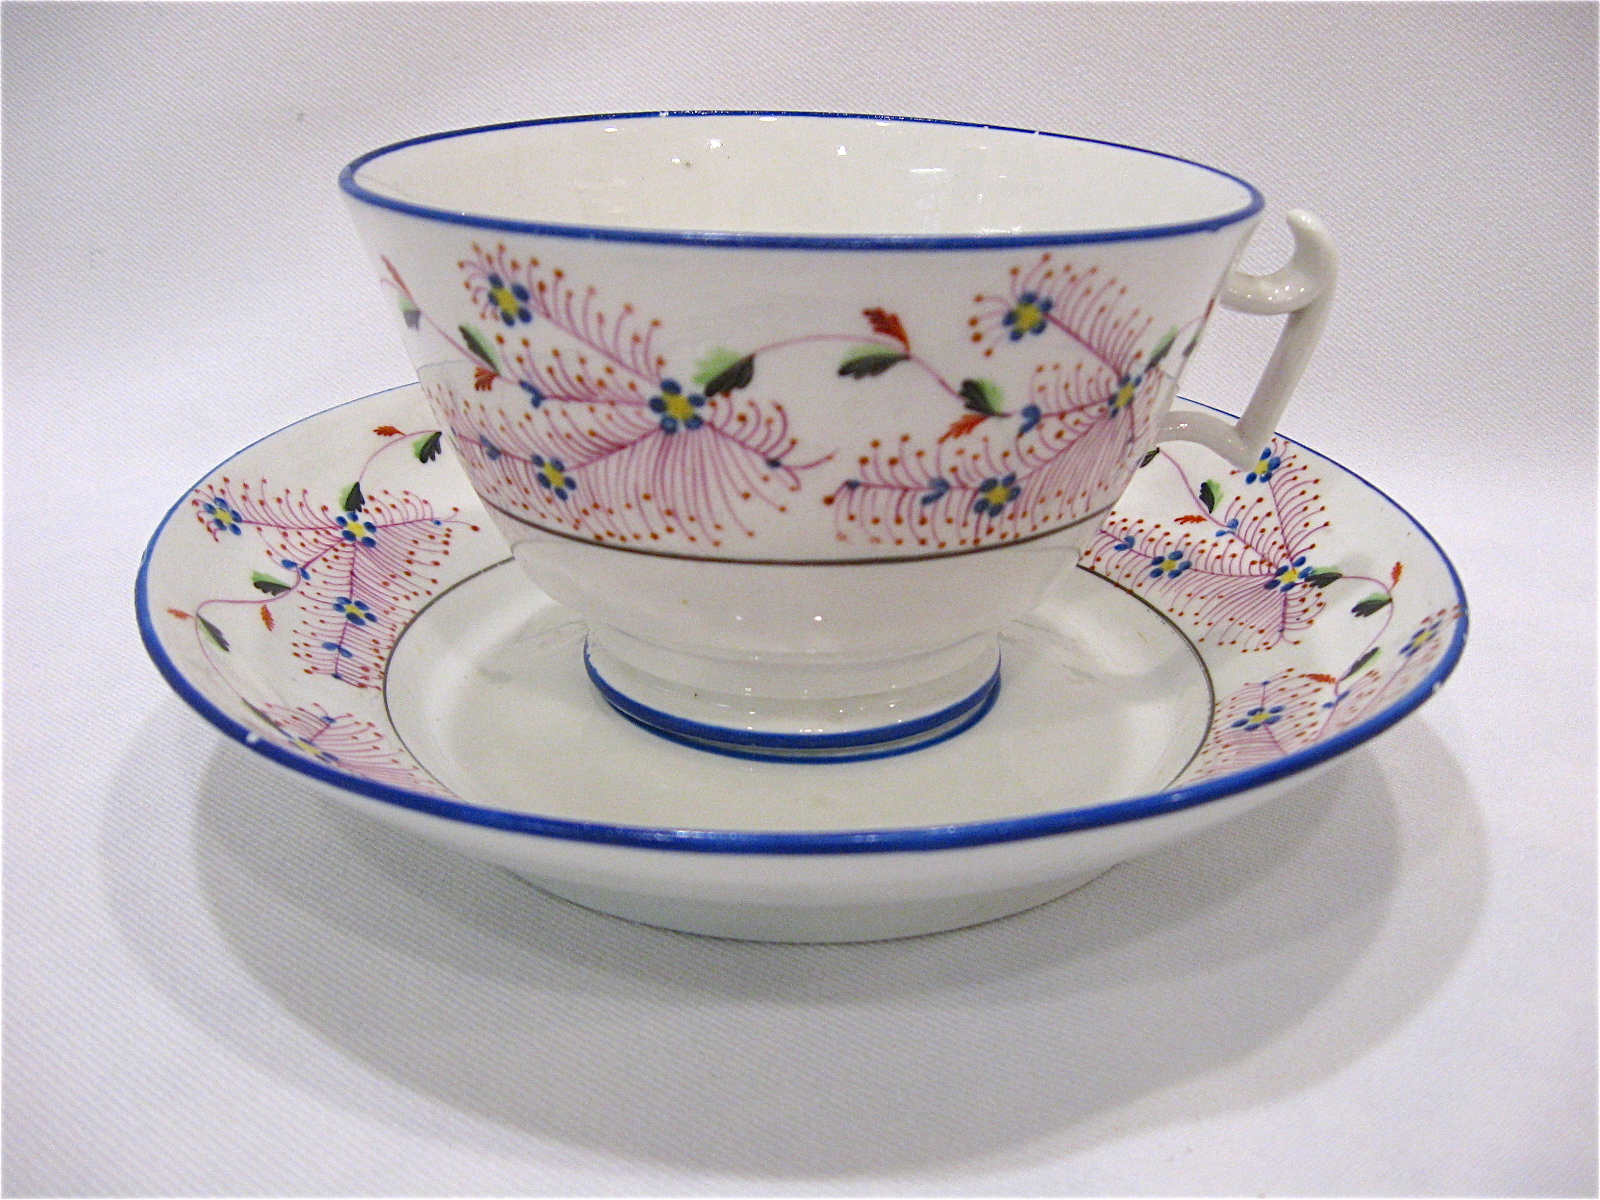 I have a pair of these large cups and saucers. 